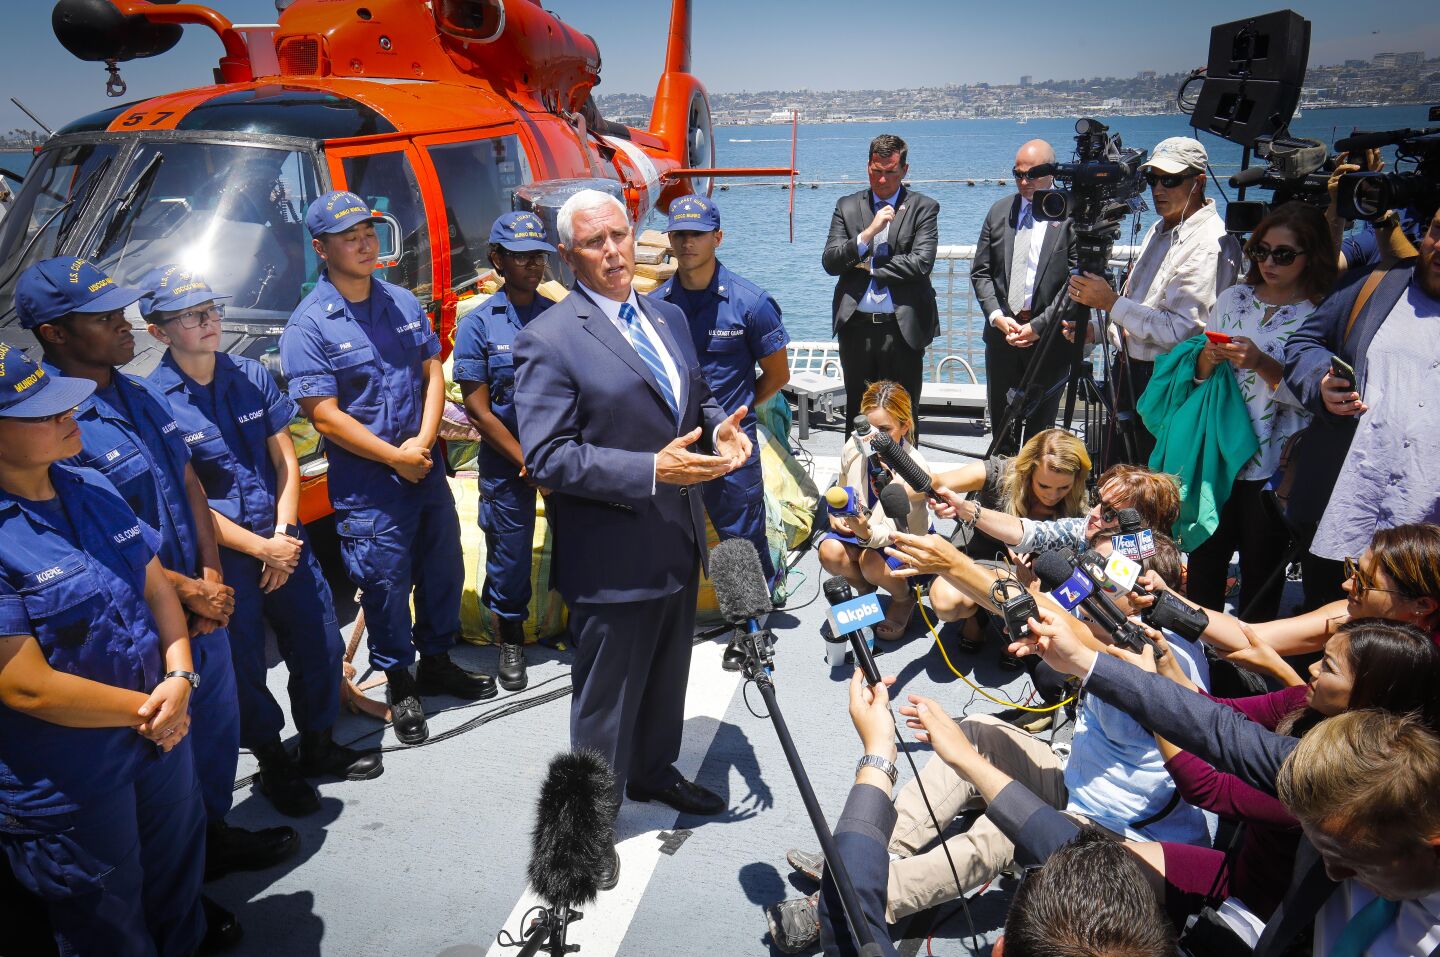 Vice President Mike Pence talks with reporters after delivering his remarks at Naval Air Station North Island aboard the U.S. Coast Guard cutter Munro, July 11, 2019, in Coronado, California during his first official trip to San Diego County since taking office. The Munro, homeported in Alameda, is tasked with seizing drugs in international waters. About 39,000 pounds of cocaine, and 1,000 pounds of marijuana seized in the Eastern Pacific Ocean in the last few months by the Coast Guard was on display during the visit, and offloaded after the Vice President left the base.